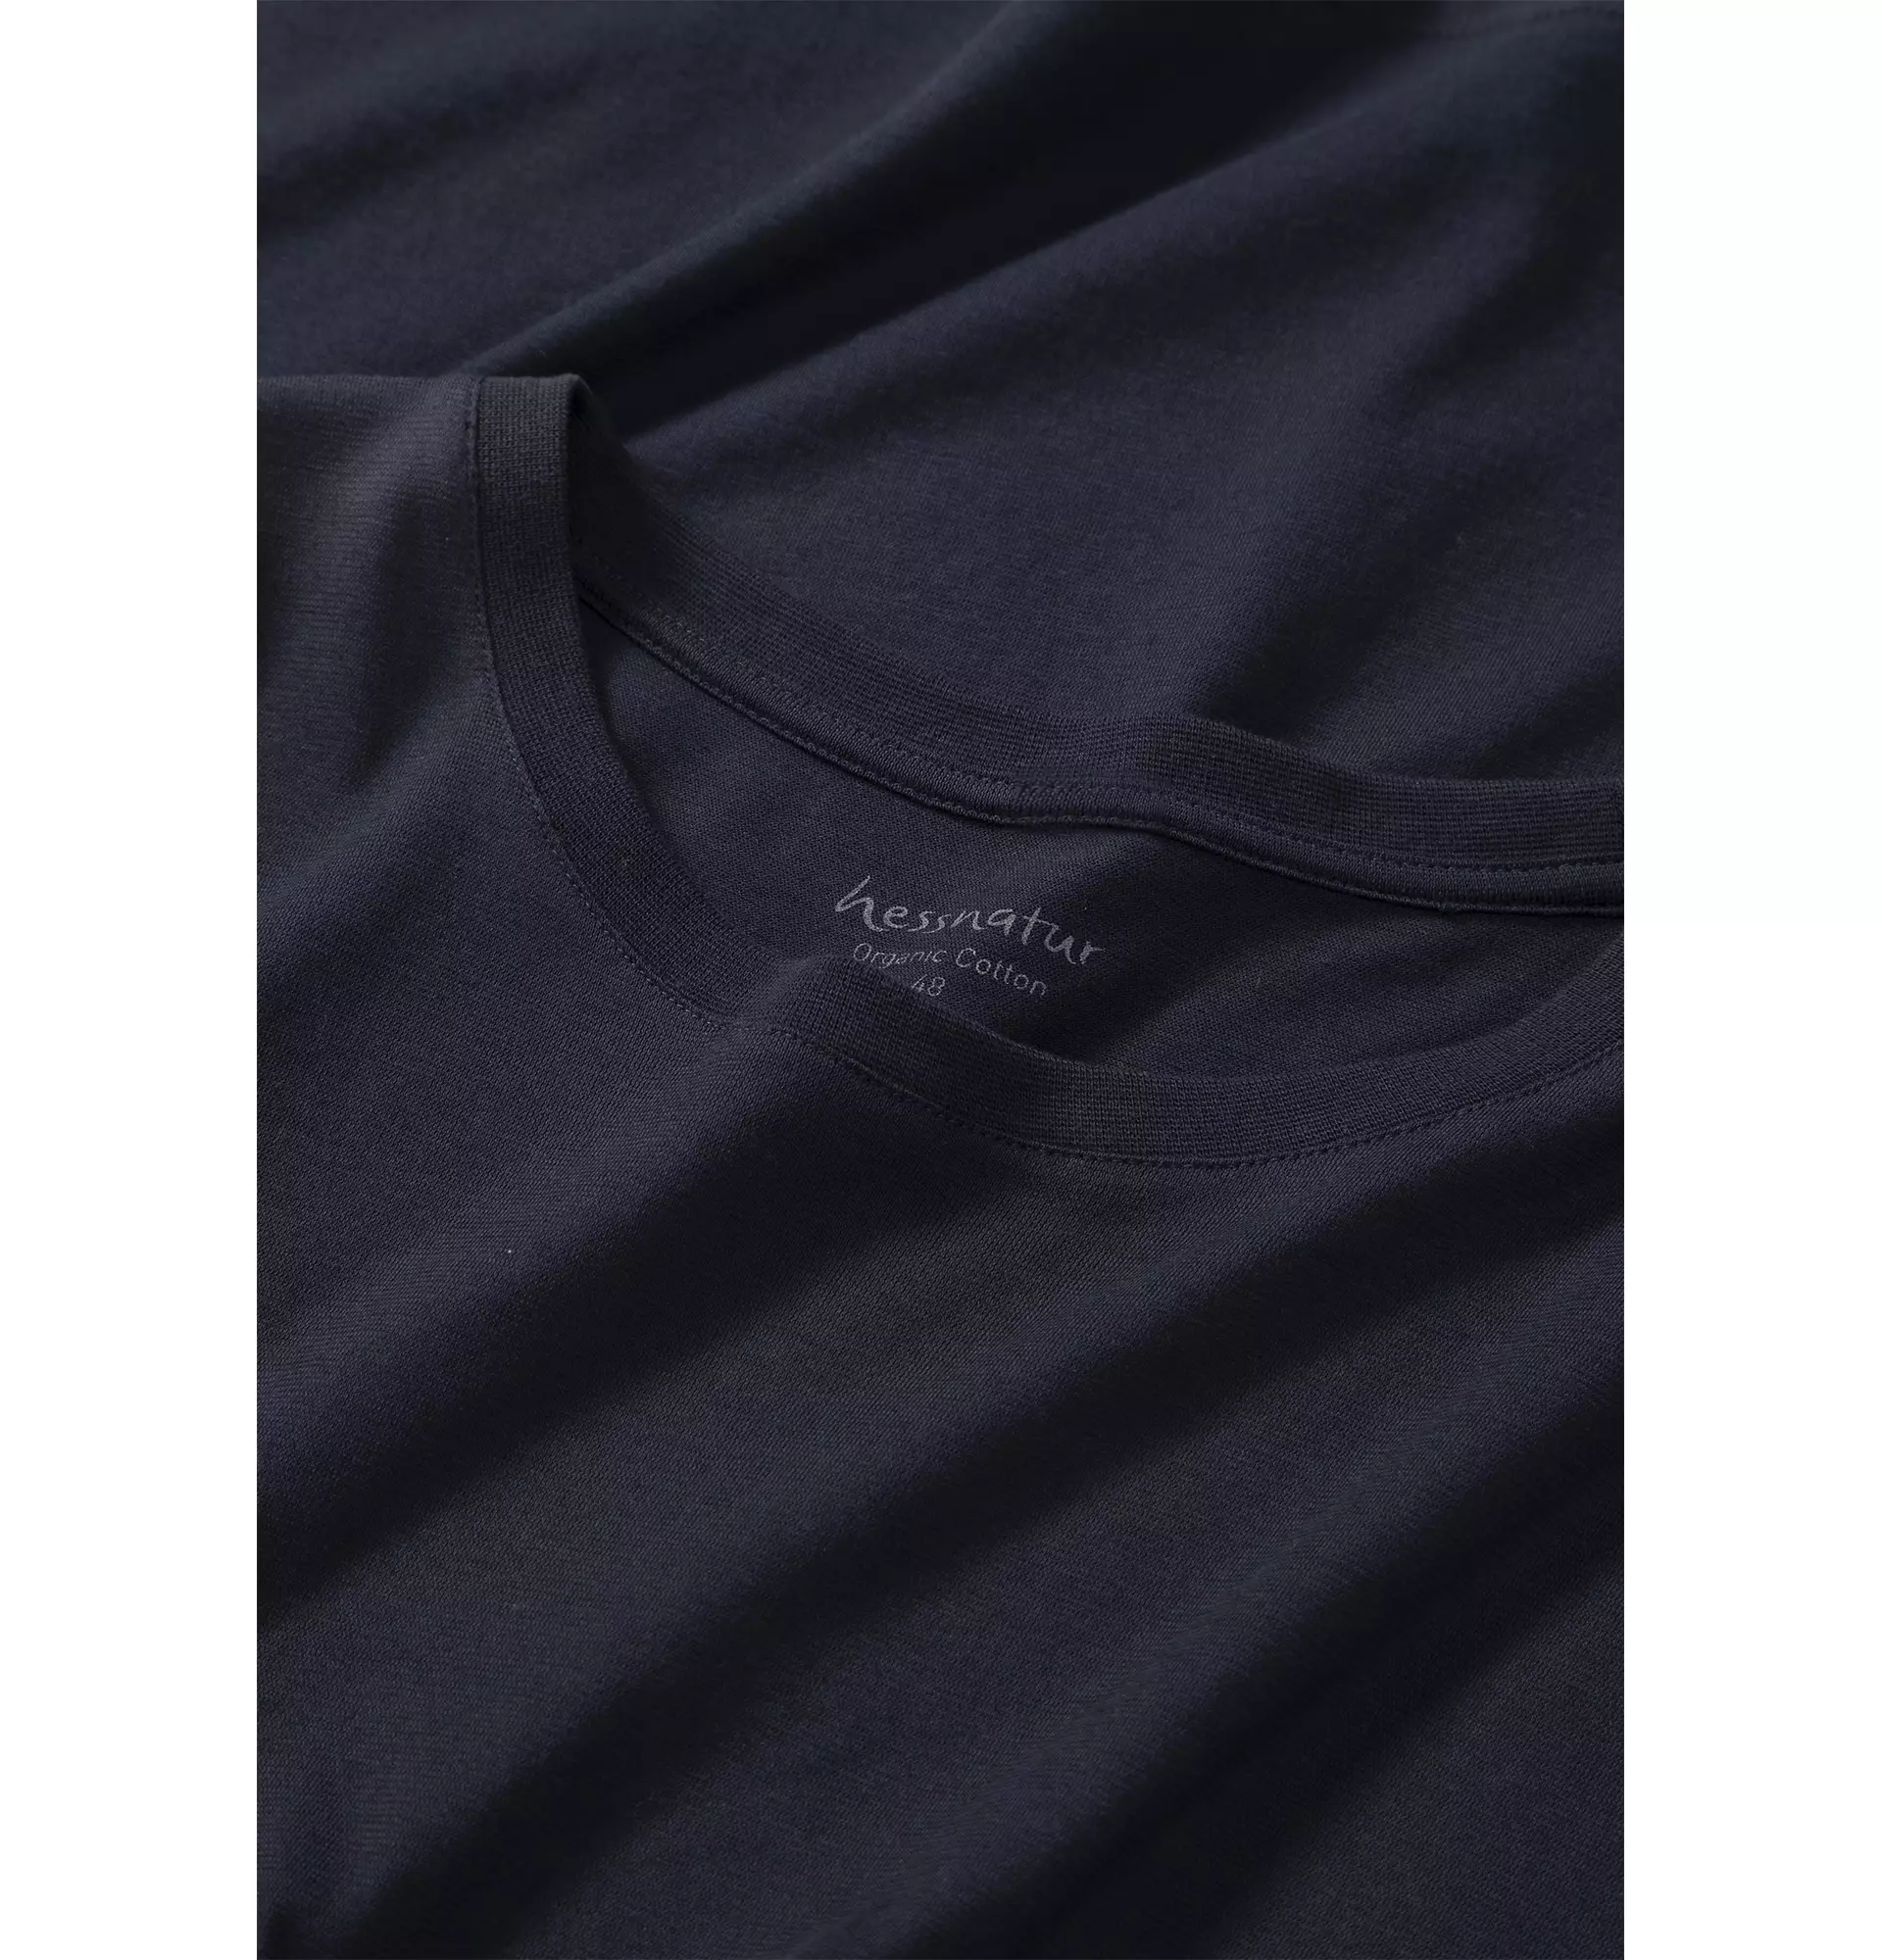 Basic regular t-shirt made from pure organic cotton in a 2-pack - 5